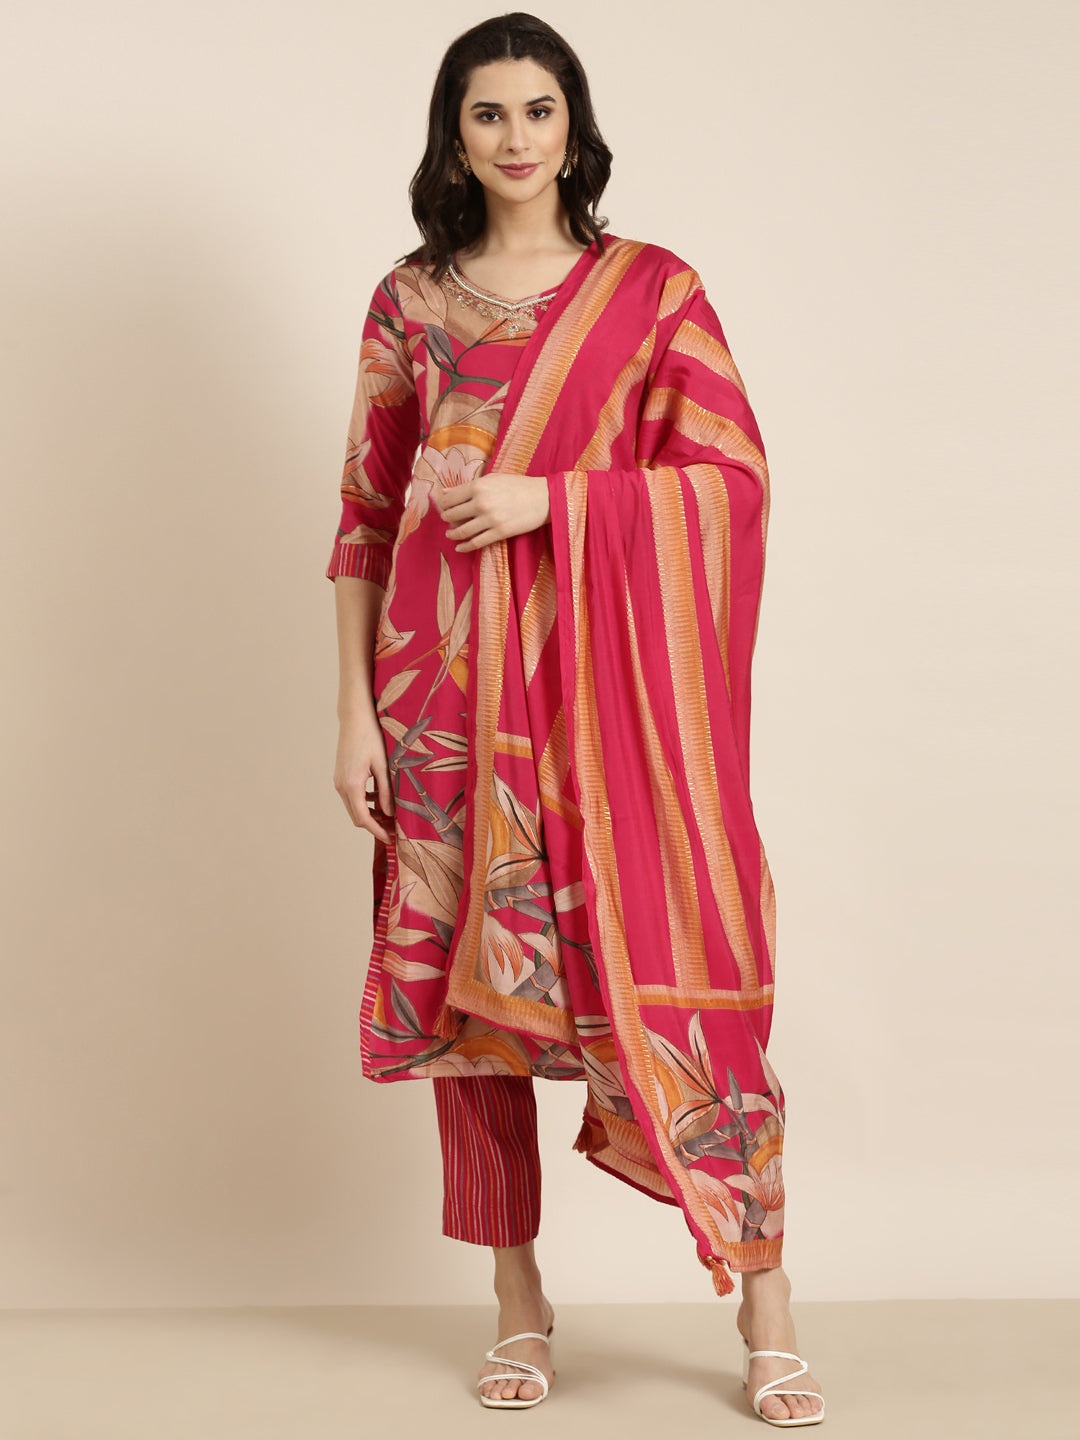 Women Straight Pink Floral Kurta and Trousers Set Comes With Dupatta